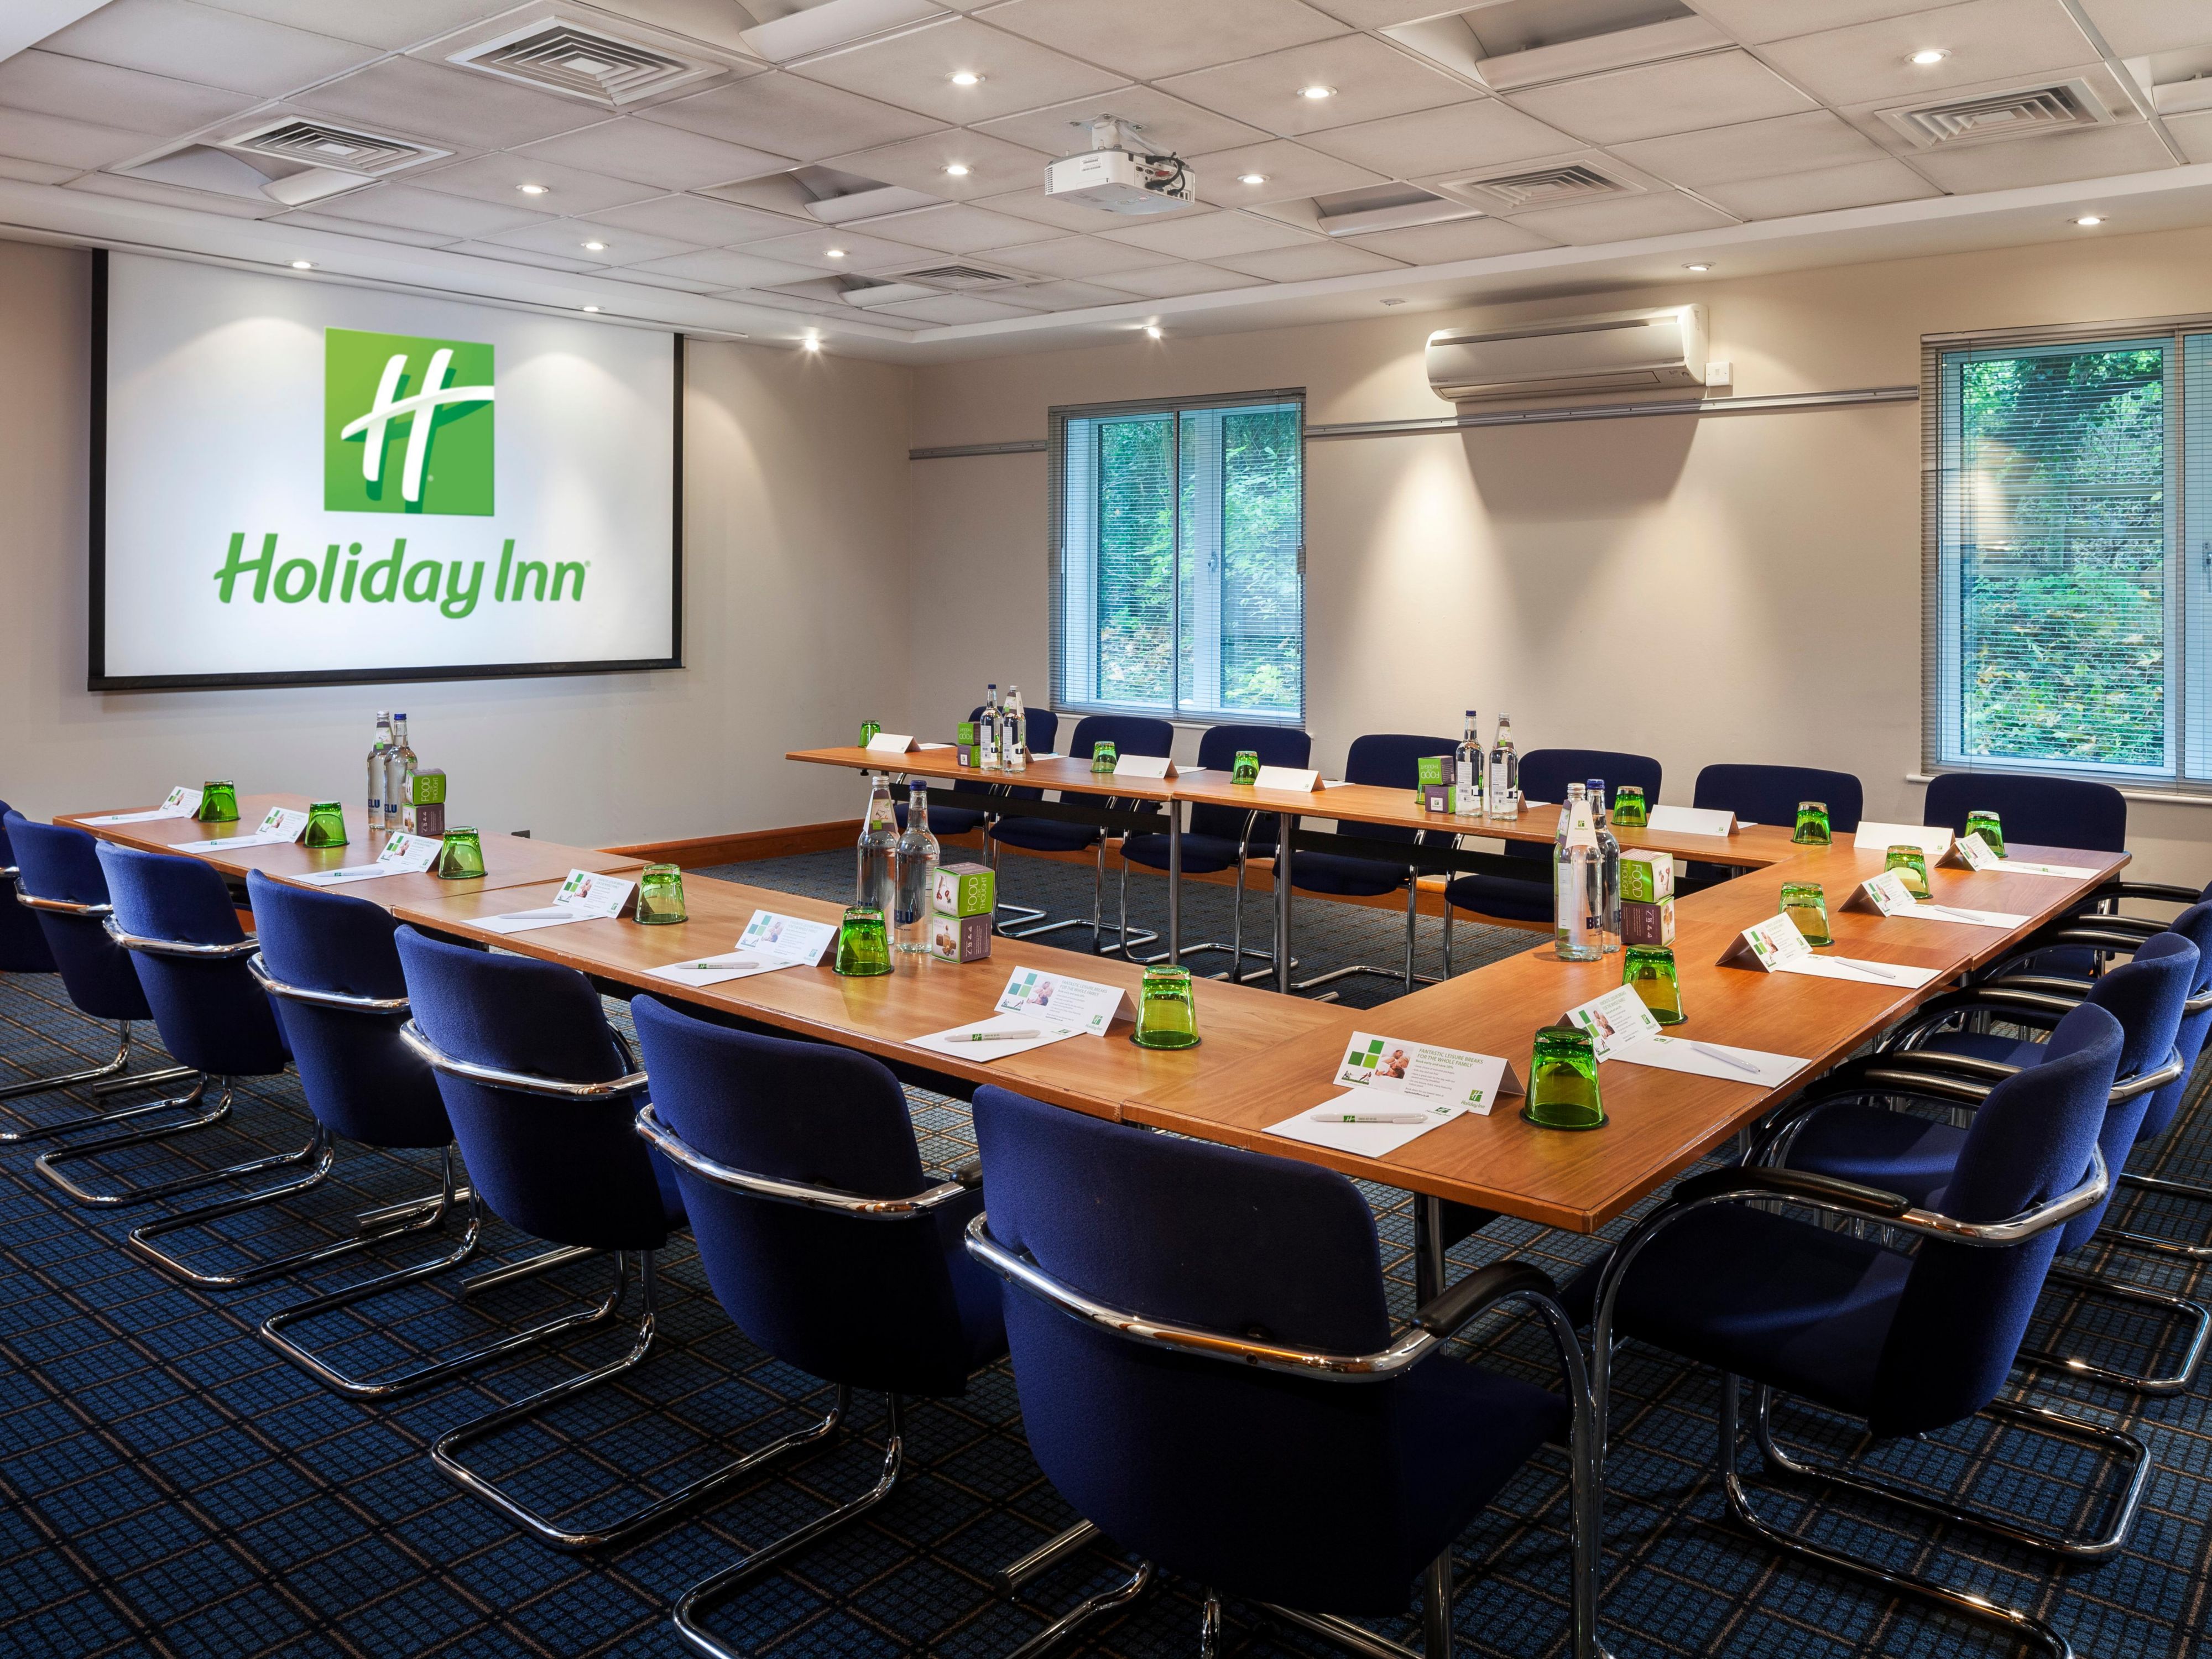 Host a conference, business meeting, or social event in our expansive Academy Conference Centre. With 11 flexible meeting rooms, audiovisual equipment, catering, and the capacity to host 160 guests, you'll have everything you need for a successful event in Oxford.